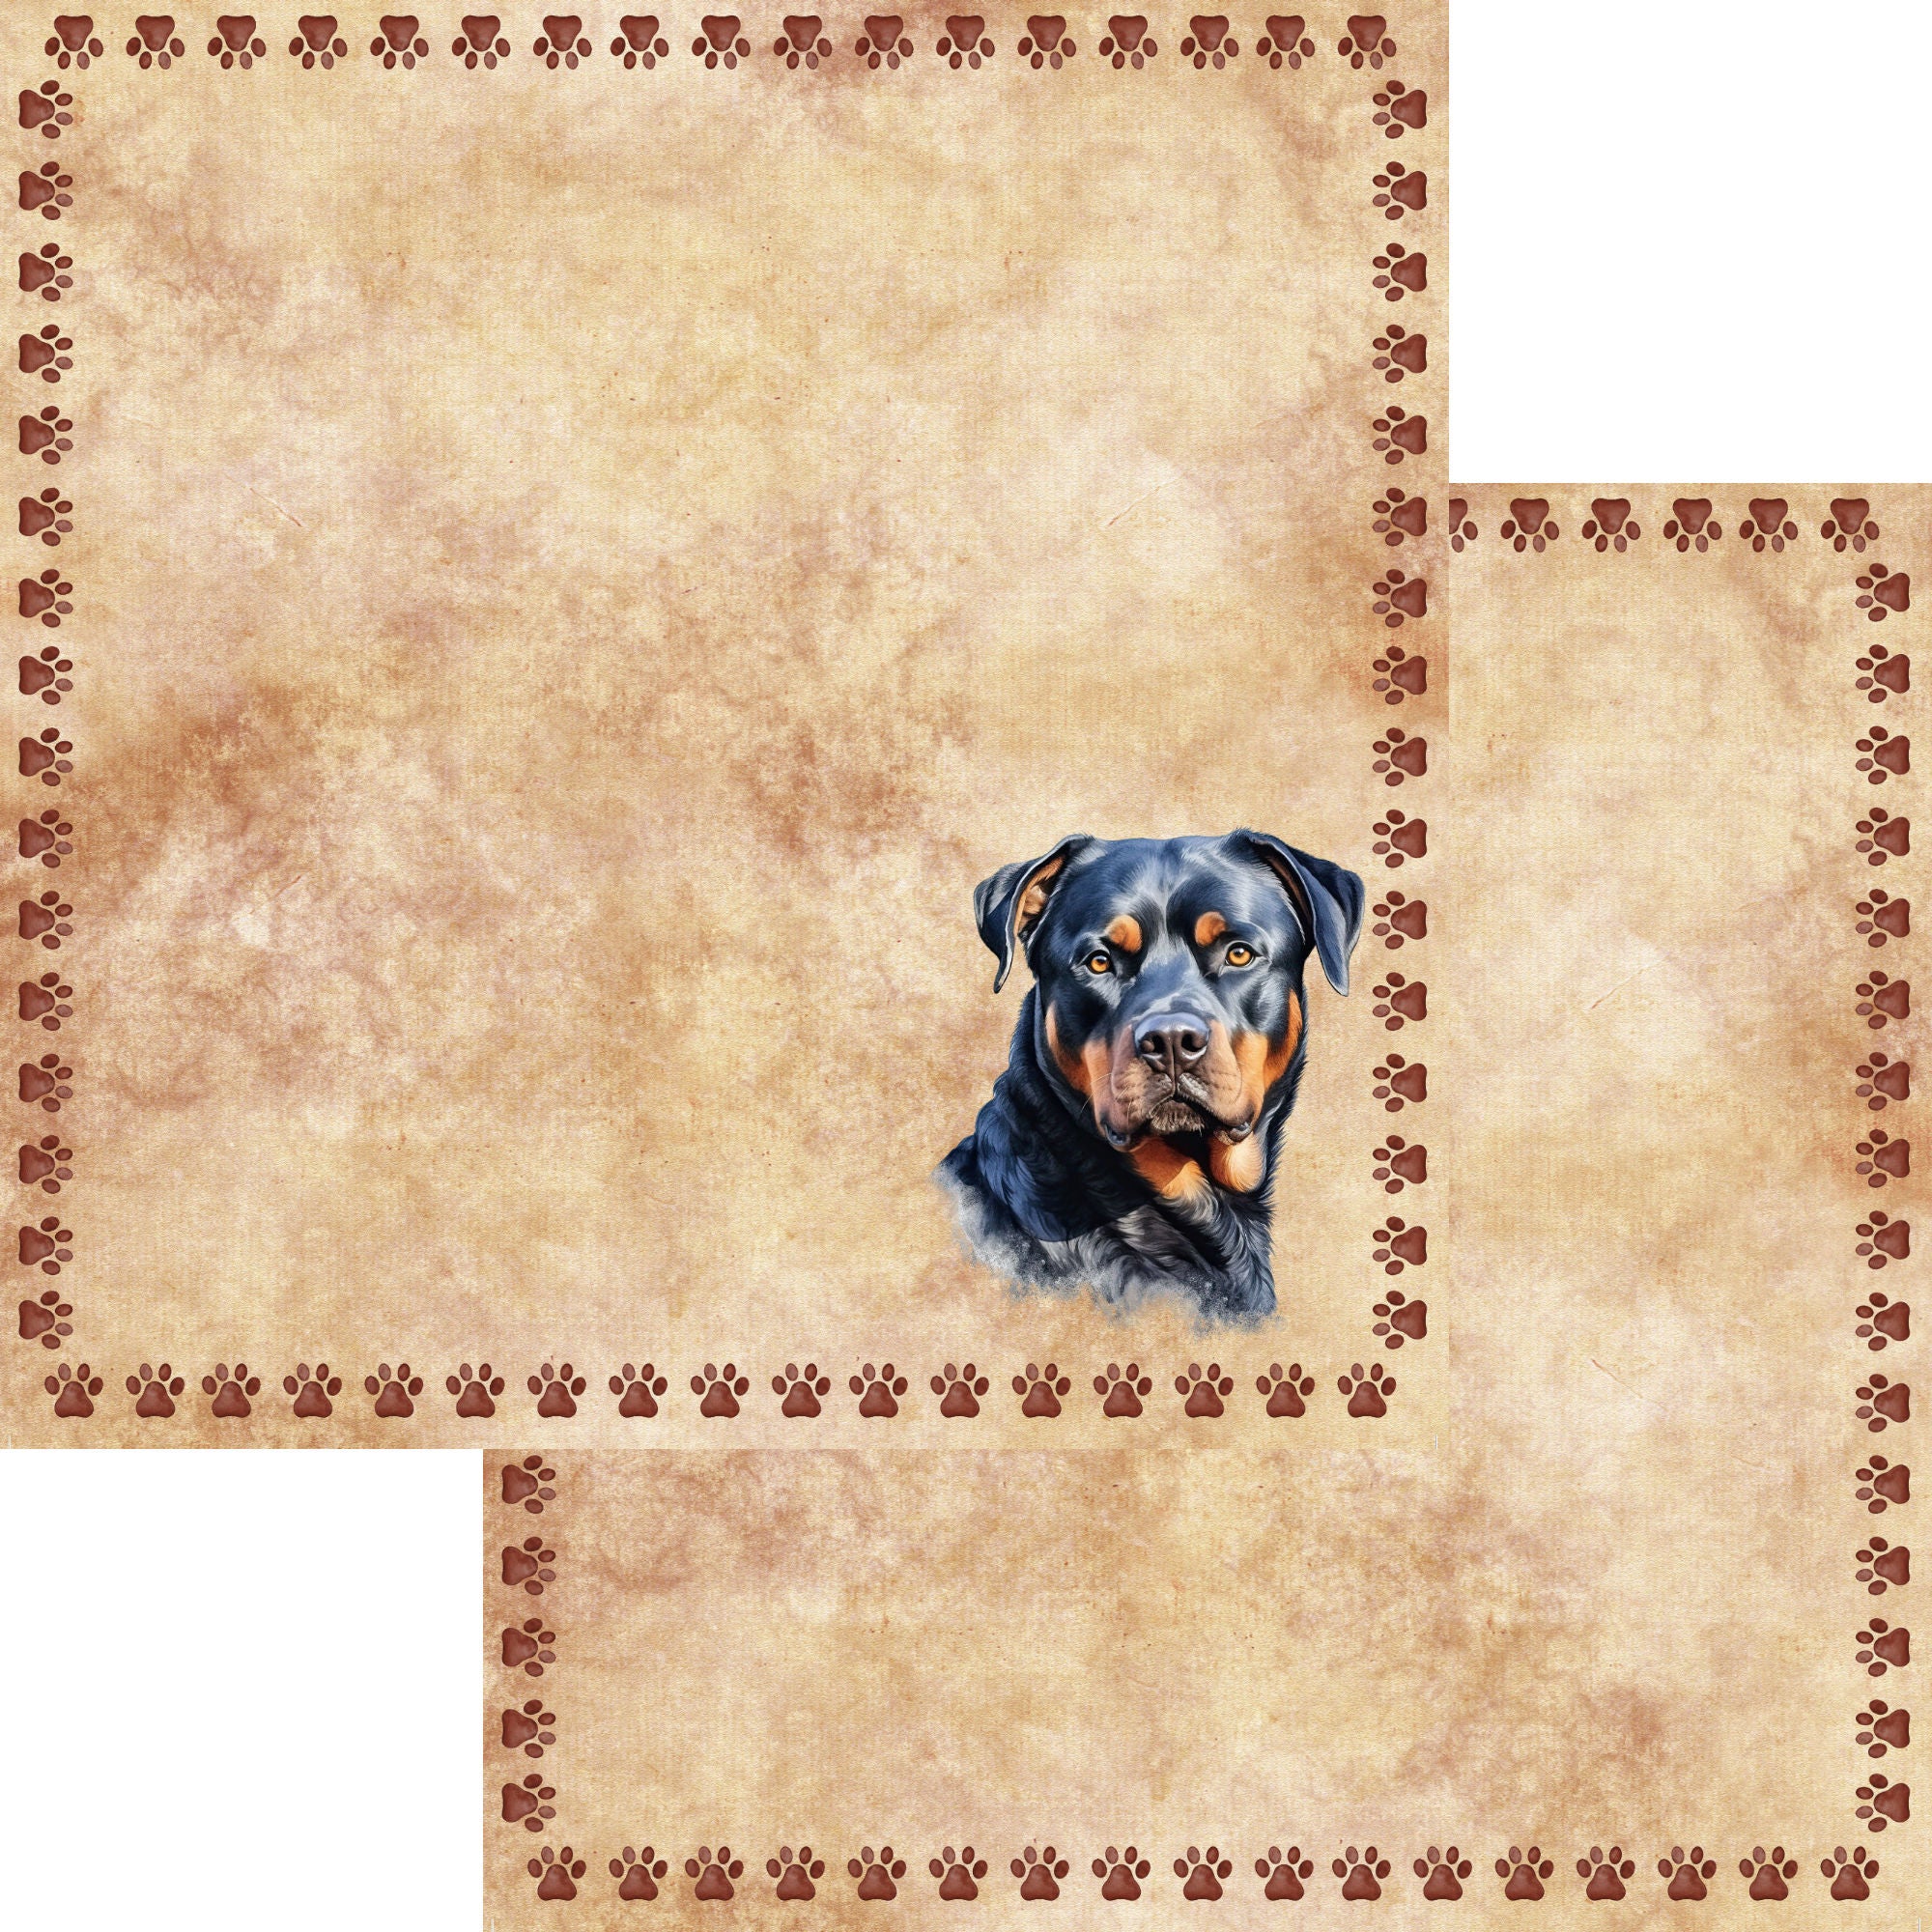 Dog Breeds Collection Rottweiler 12 x 12 Double-Sided Scrapbook Paper by SSC Designs